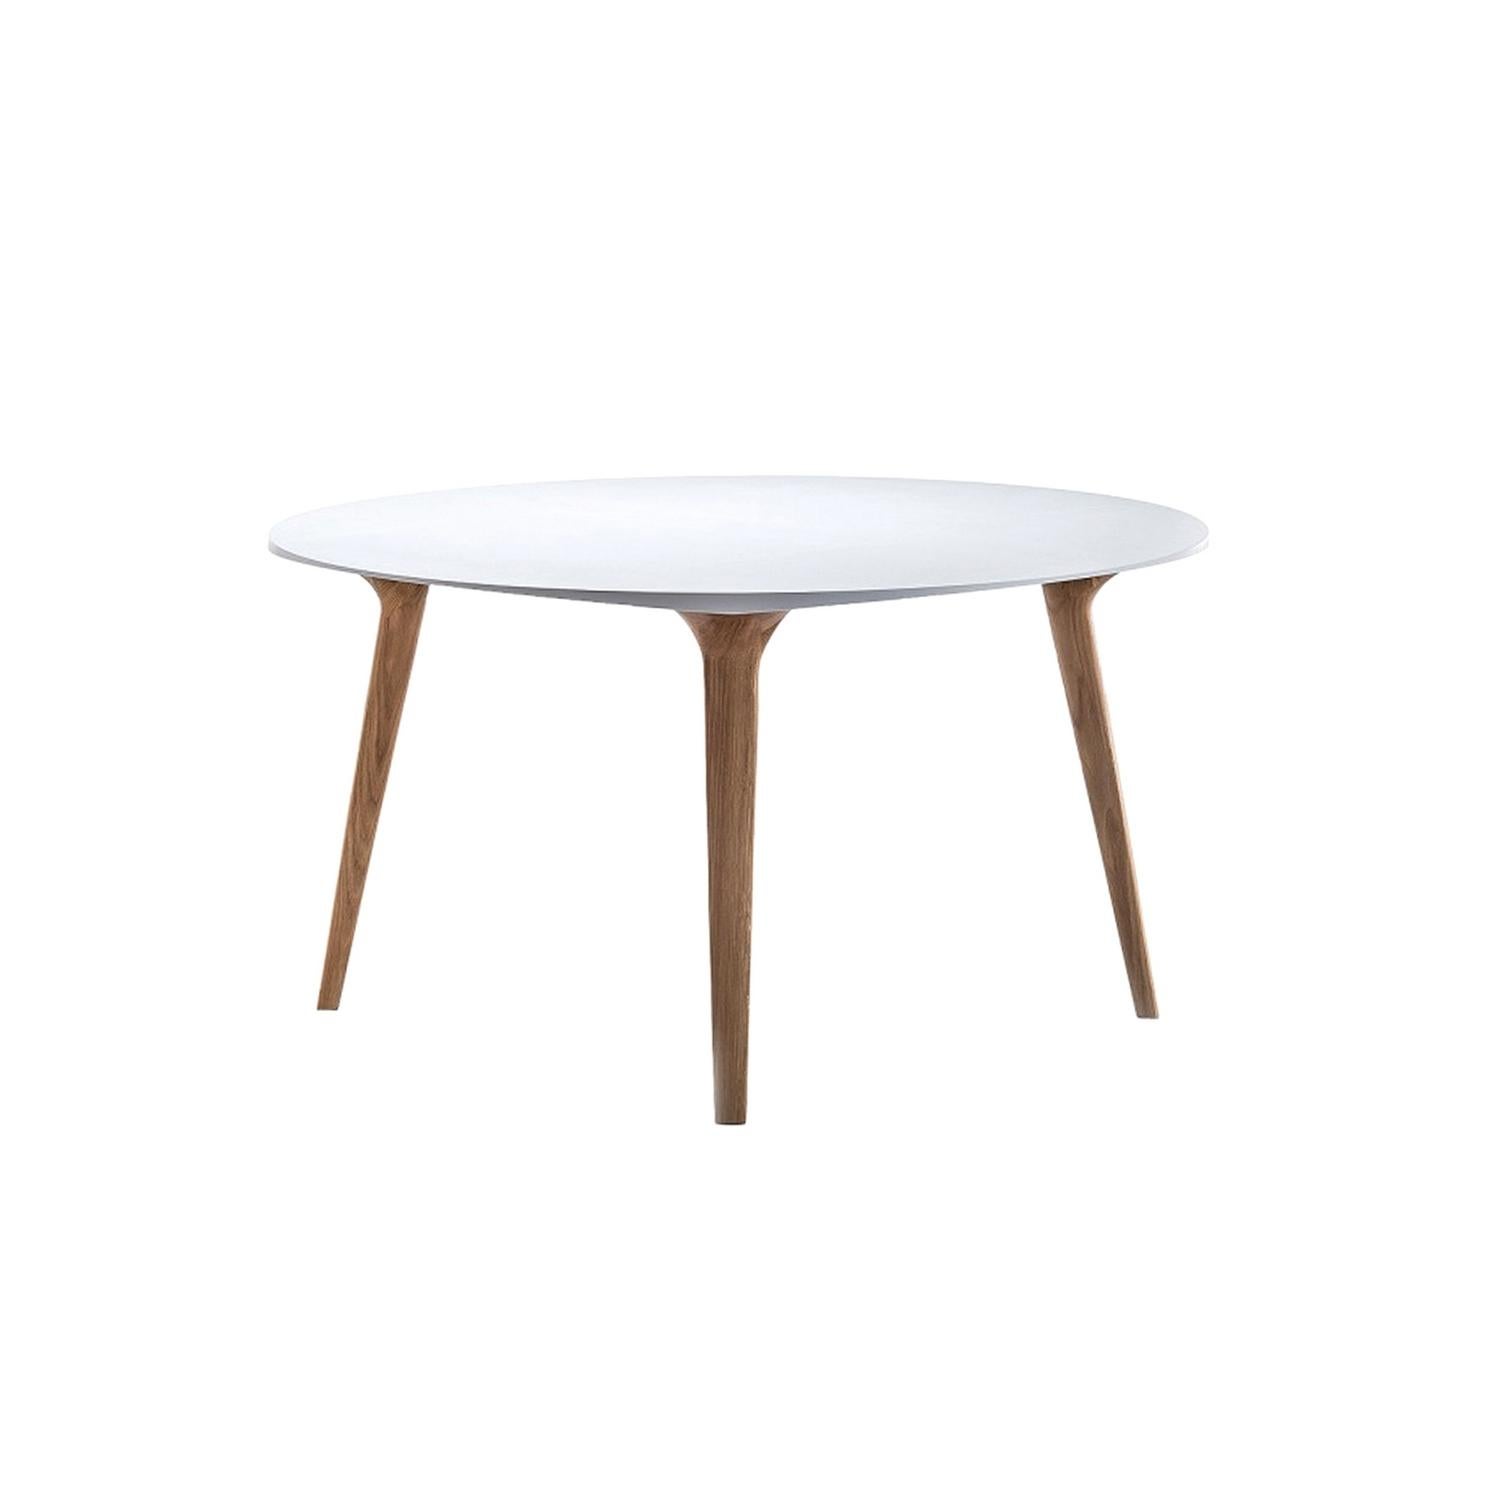 Italian Ademar Walnut / Marble Dining Table, designed by Giulio Lacchetti, Made in Italy For Sale